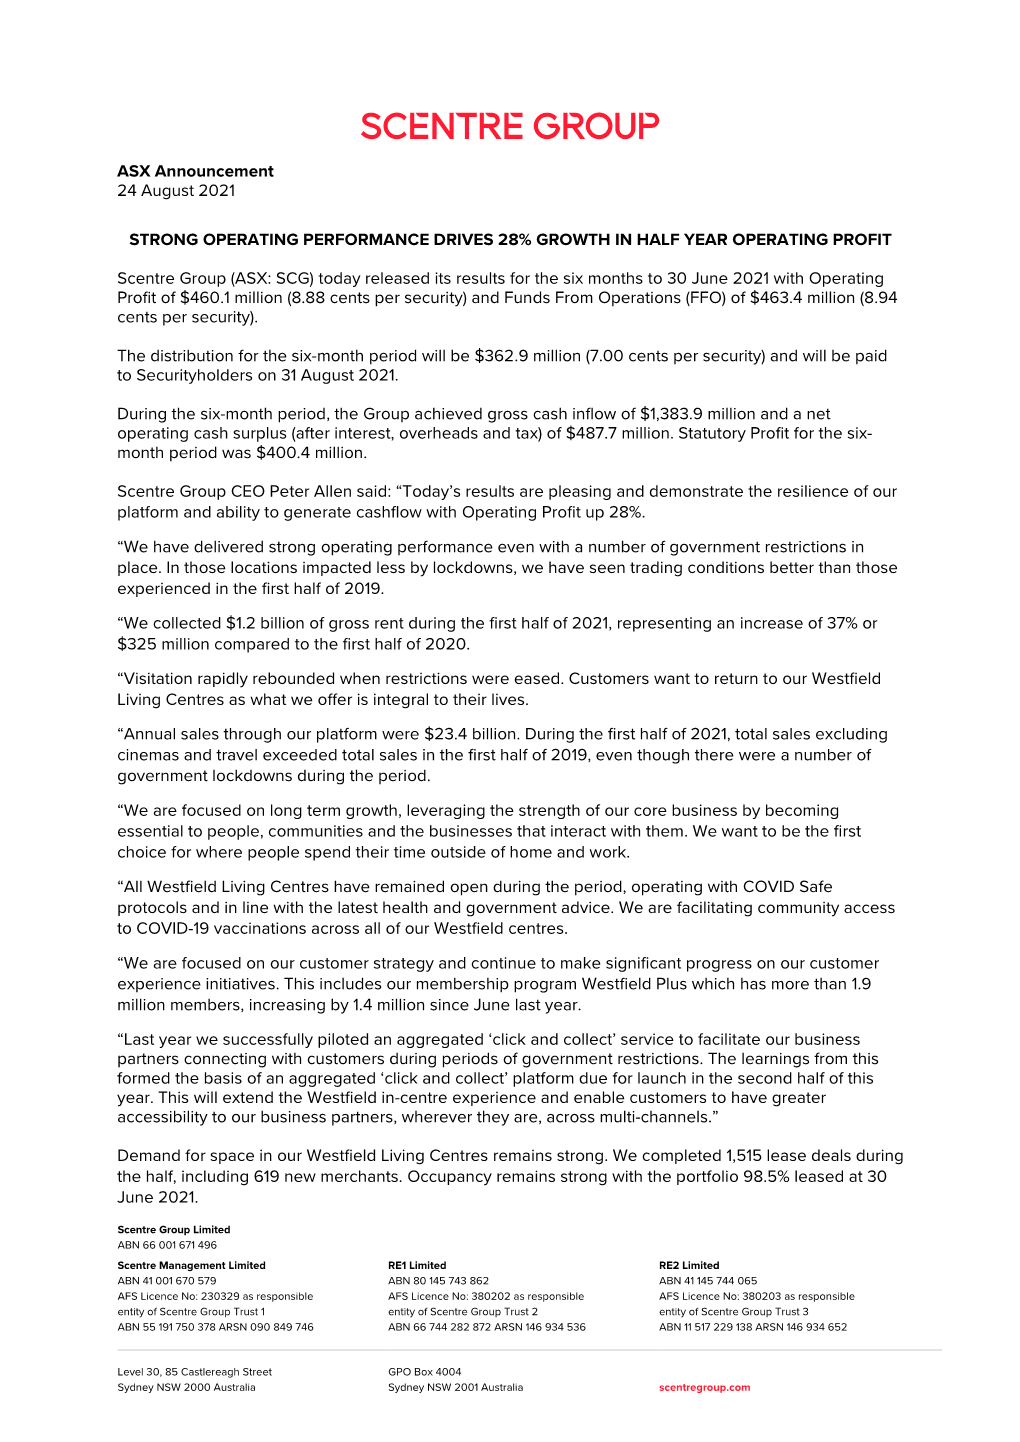 ASX Announcement 24 August 2021 STRONG OPERATING